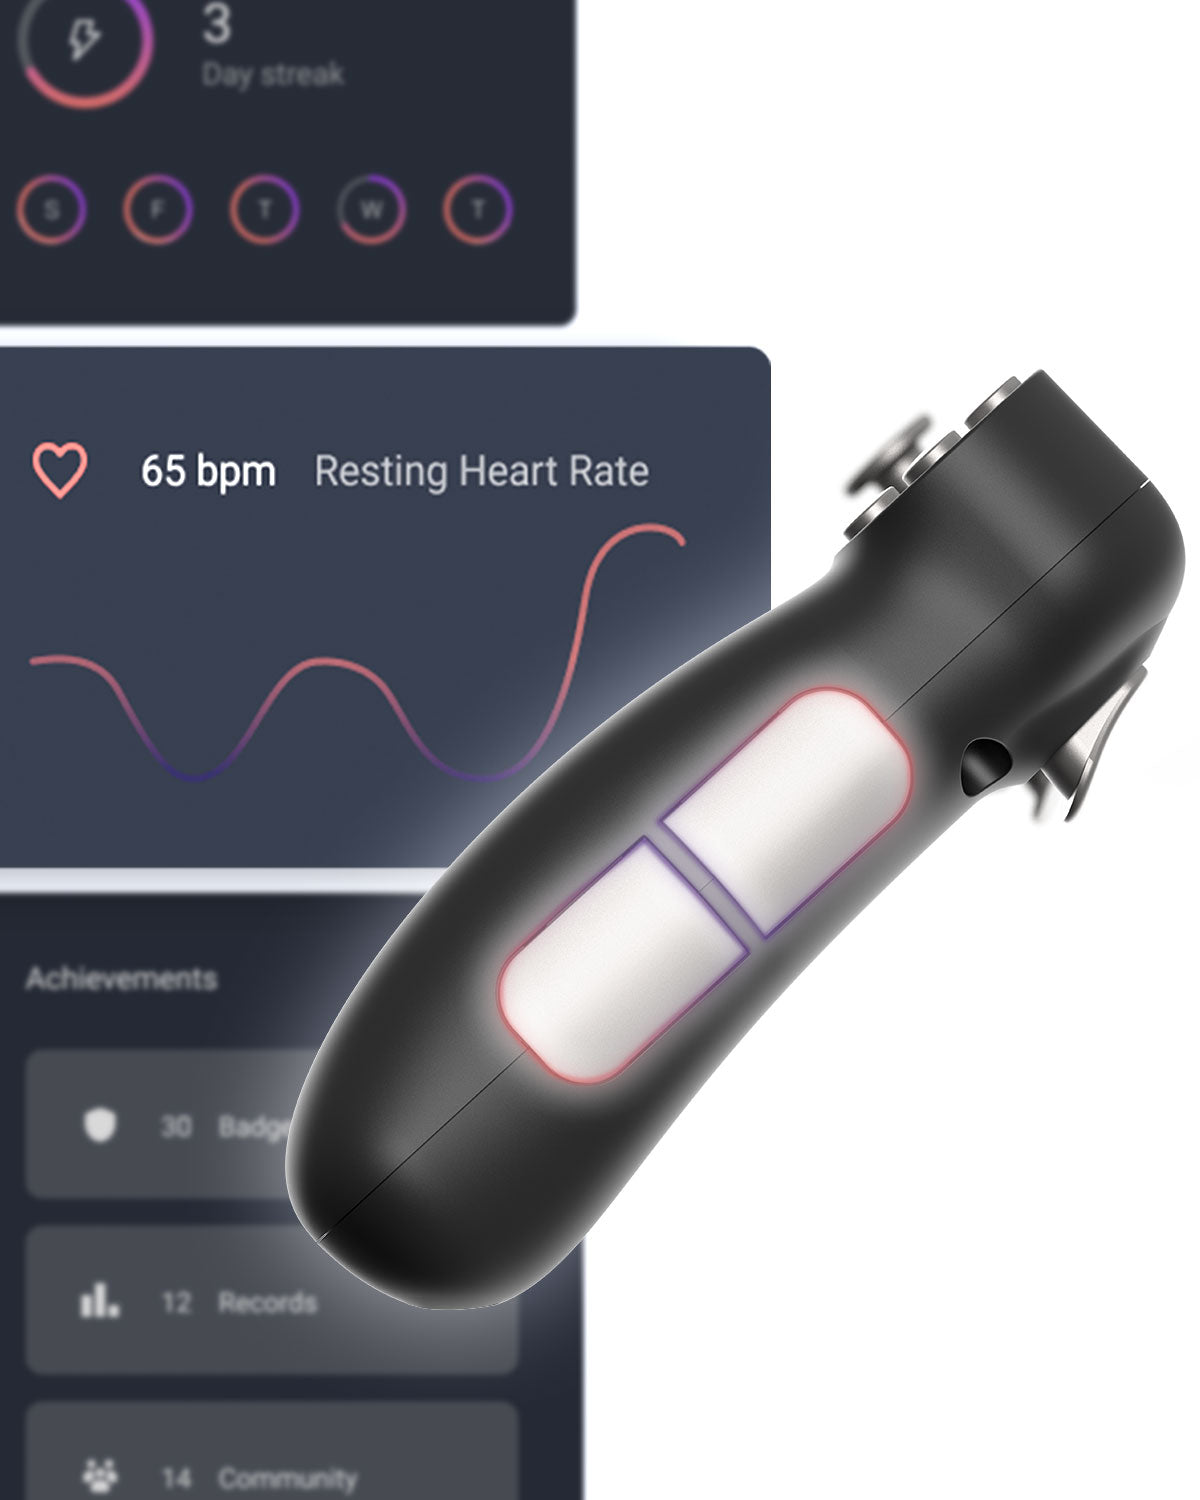 Our game controllers  have built in heart rate sensors to track your progress. And for the pros out there, there will be wireless connectivity supporting most devices.